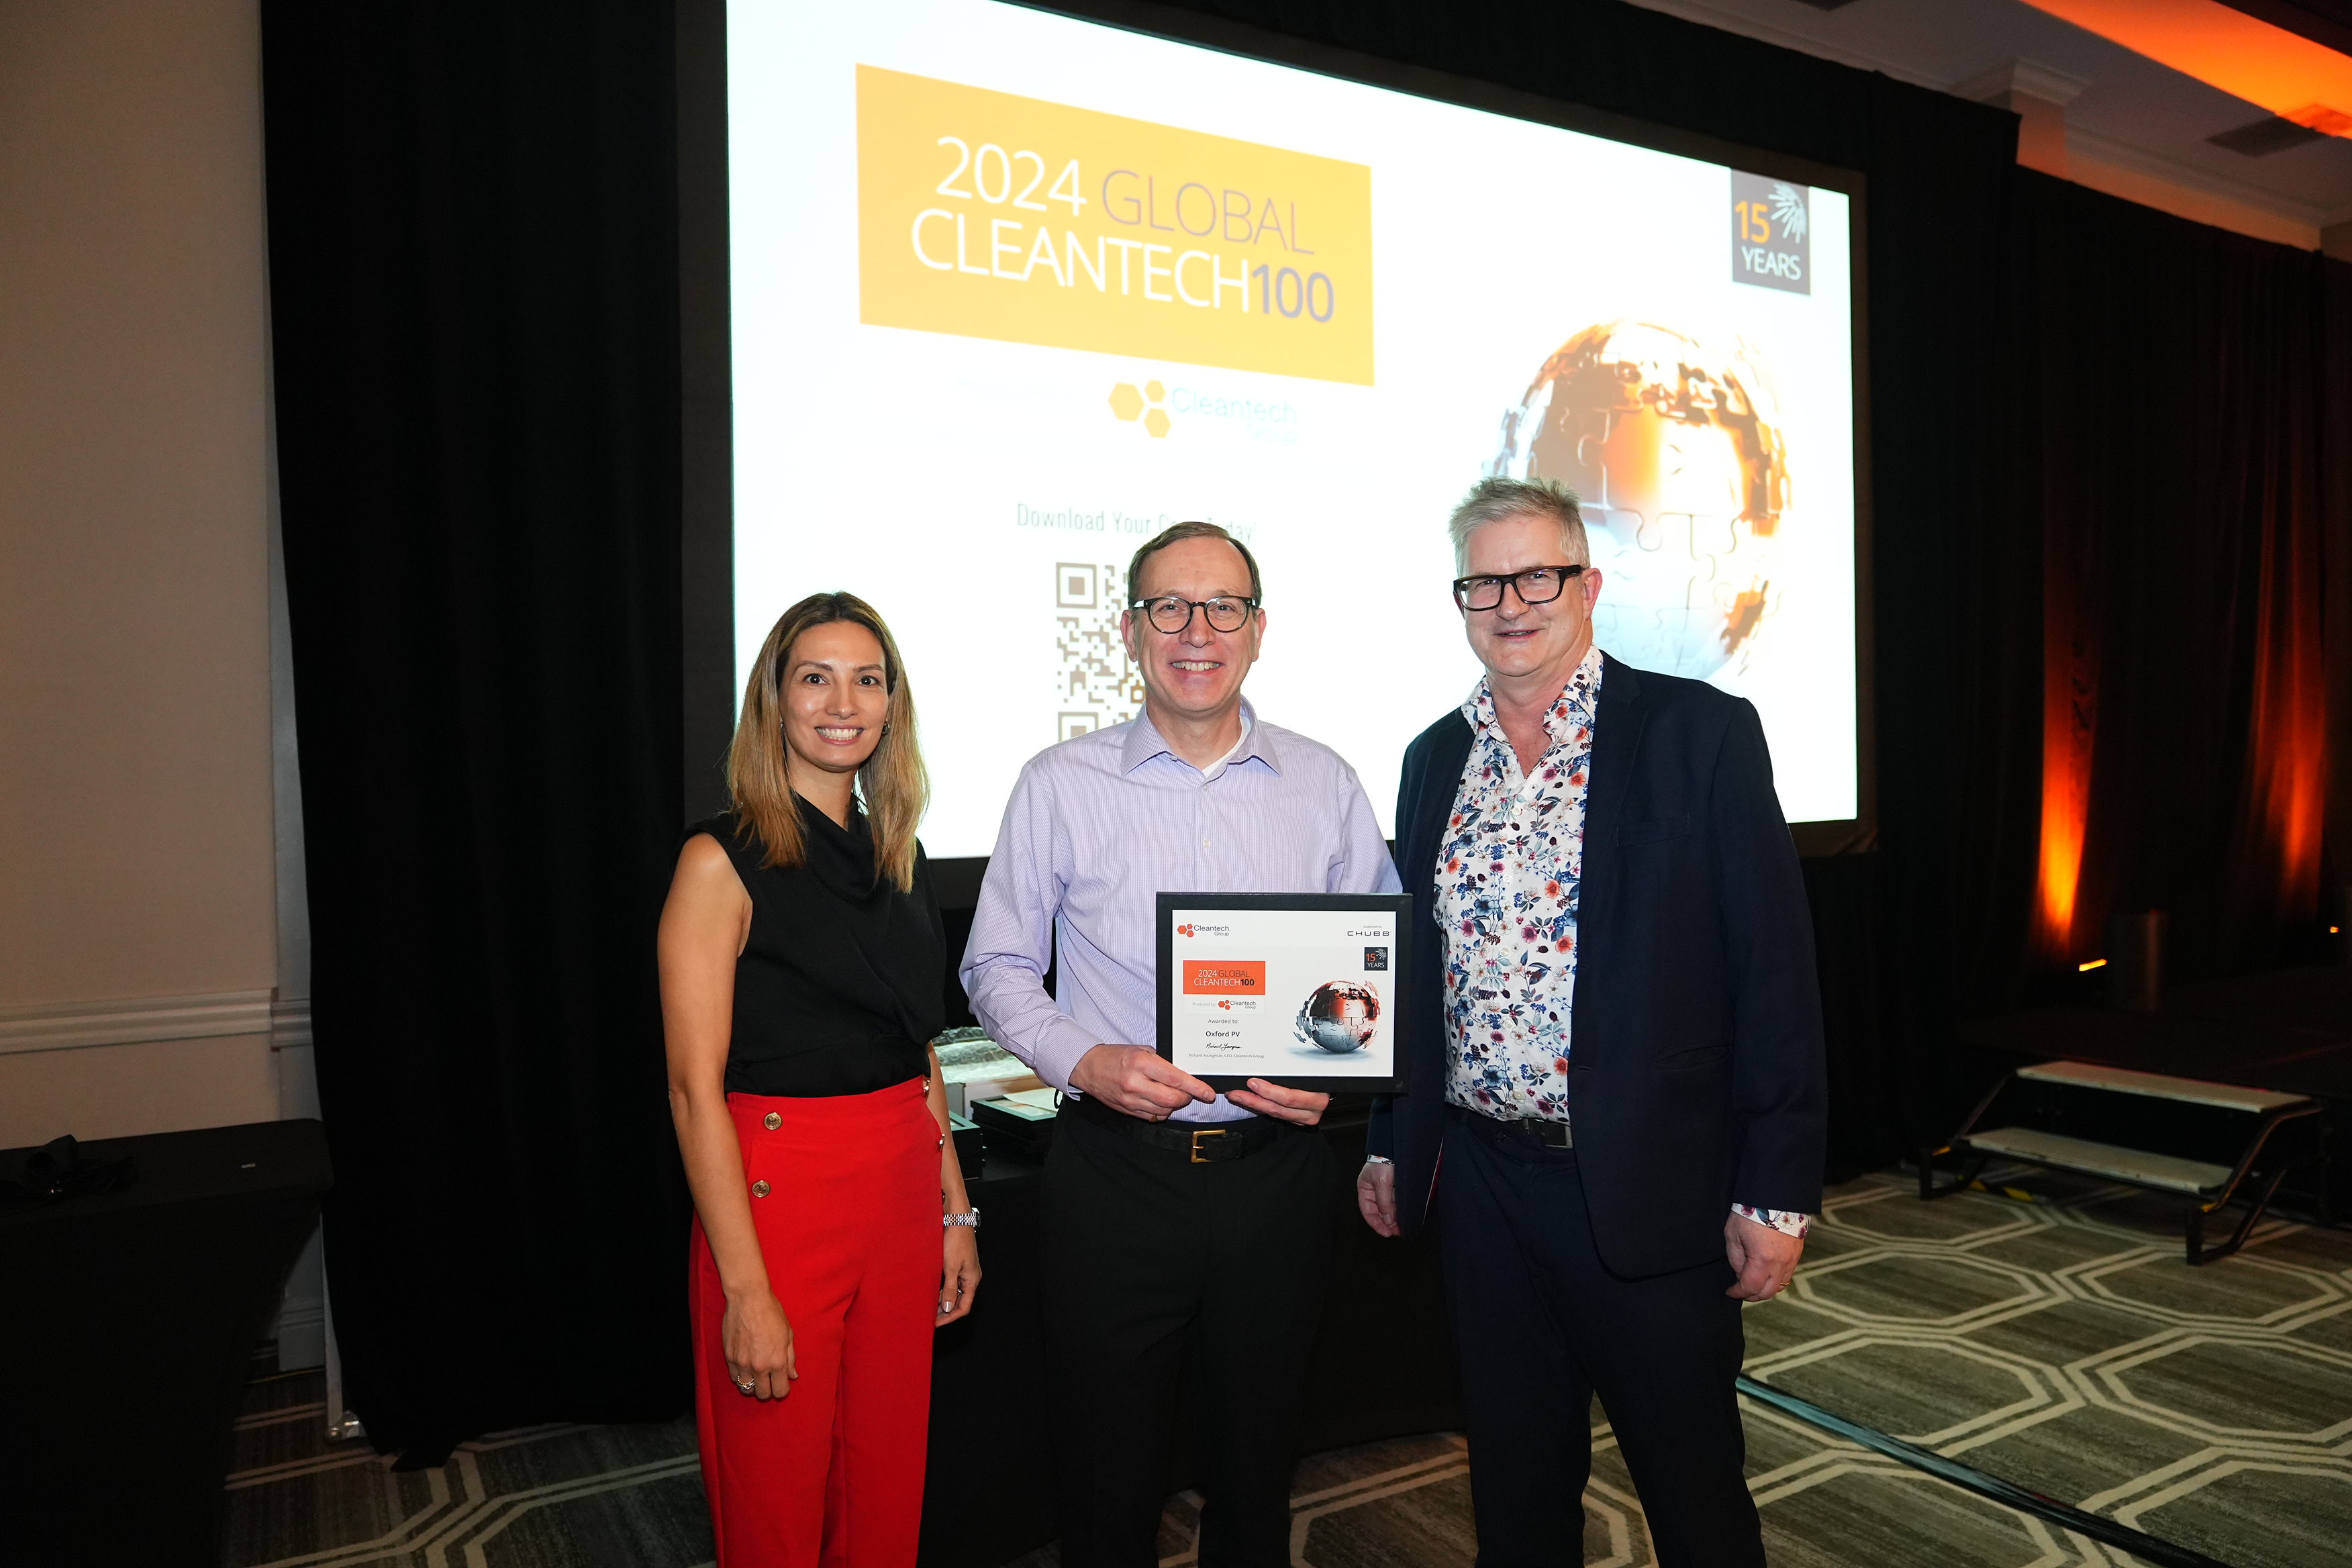 Oxford PV CEO David Ward accepting the Cleantech 100 2024 award